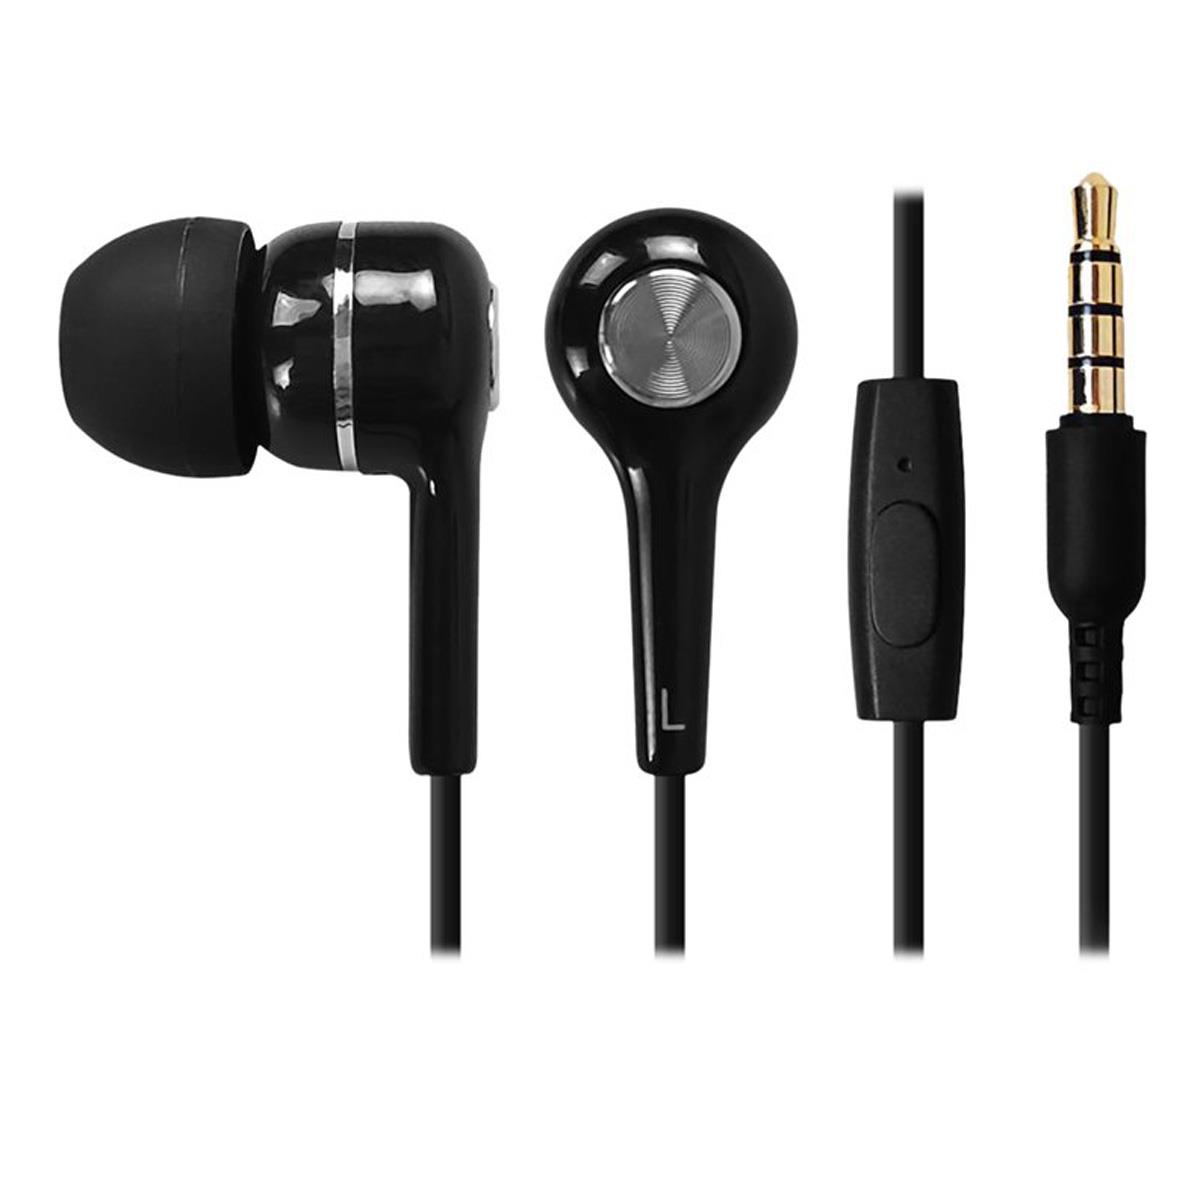 

iMicro SP-IMT22 Wired In-Ear Earphones, Black